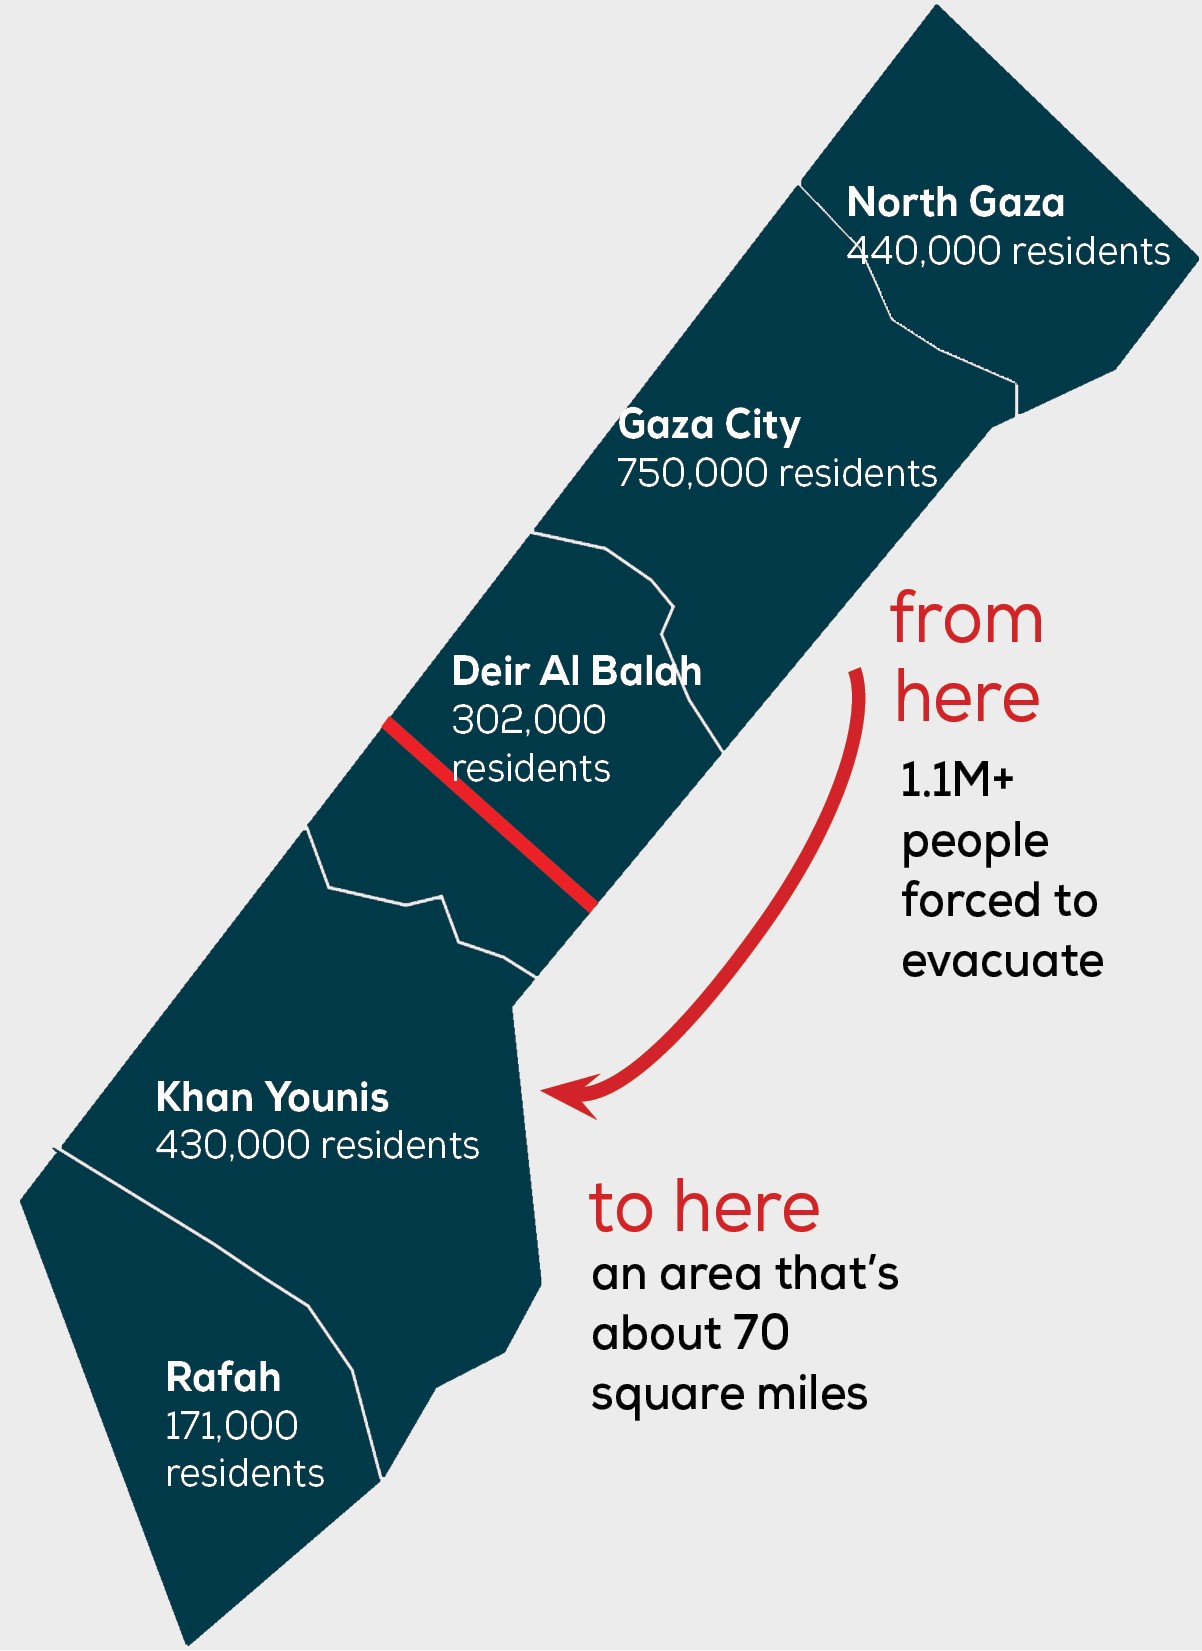 On October 12, 2023, 1.1 million Palestinians received evacuation orders to relocate south of Wadi Gaza to escape bombing and Israeli military operations.